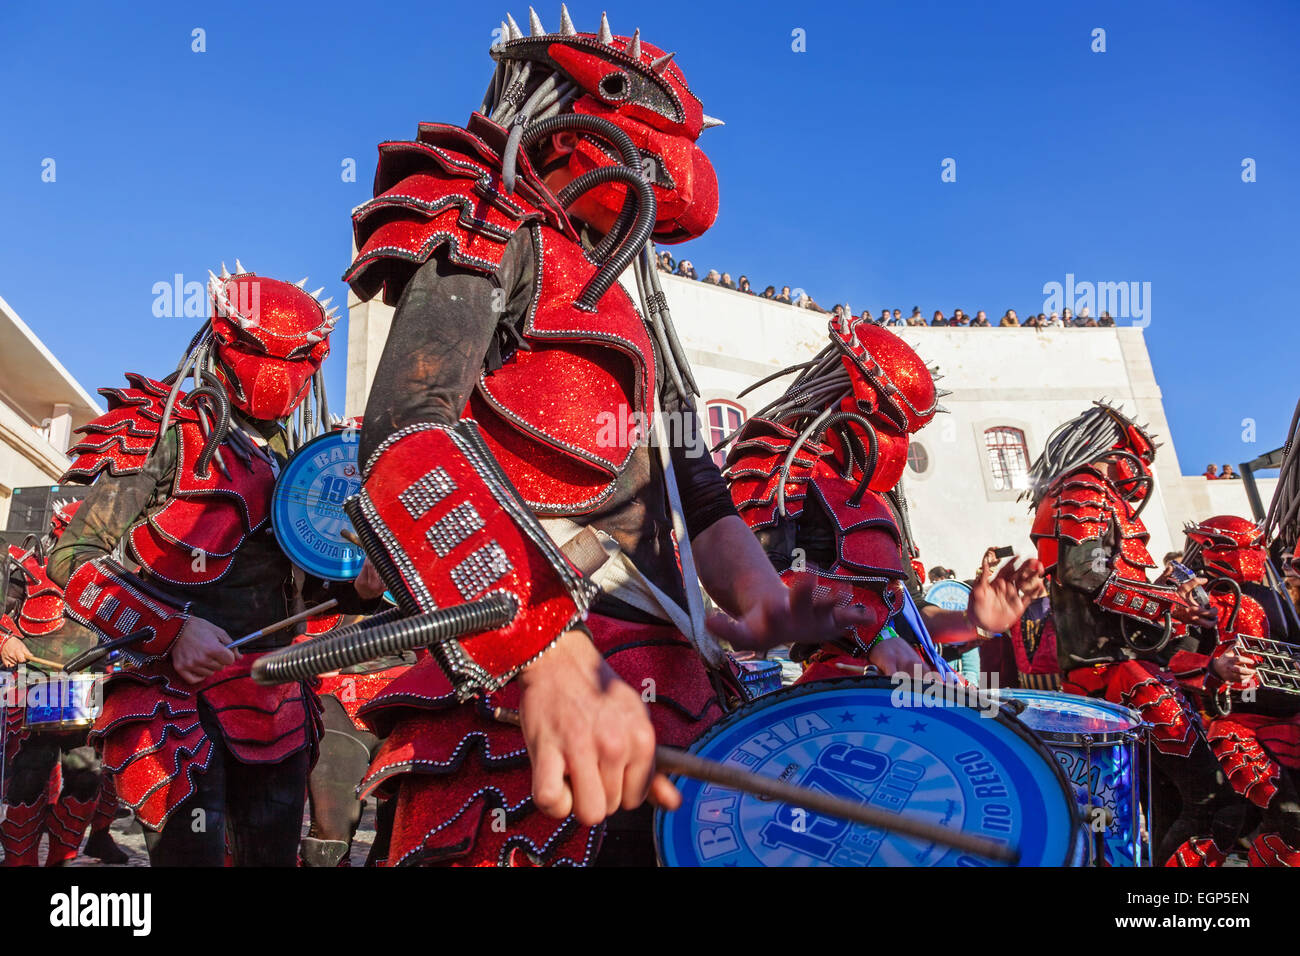 Bateria, the musical section of the Samba School, playing for dancers in the Rio de Janeiro style Carnaval parade. Stock Photo